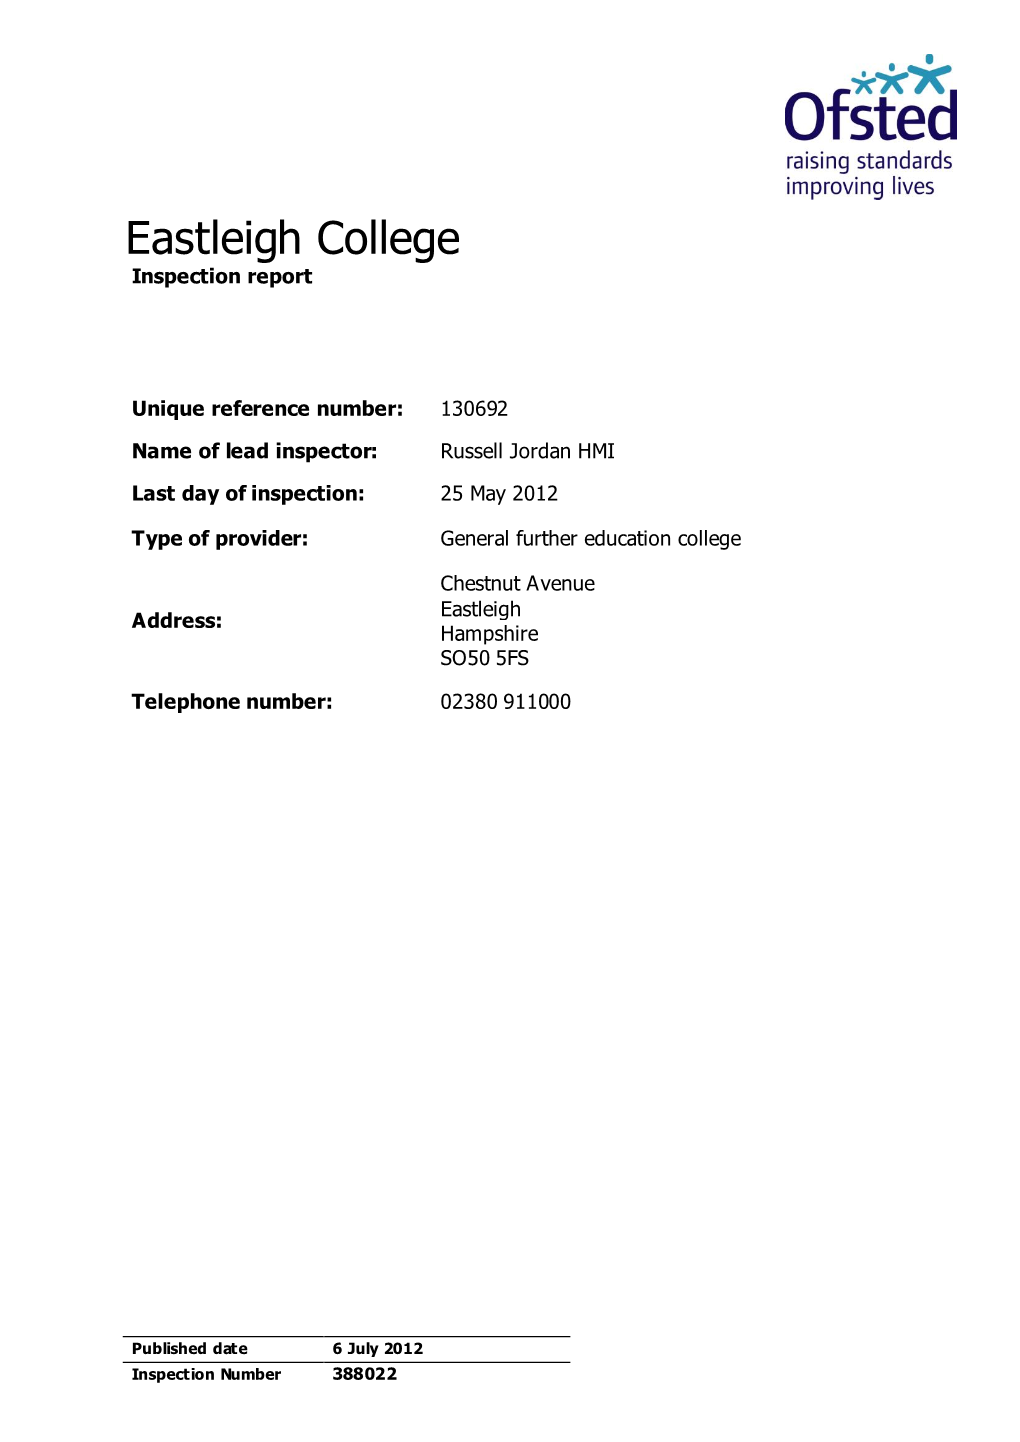 Eastleigh College Inspection Report